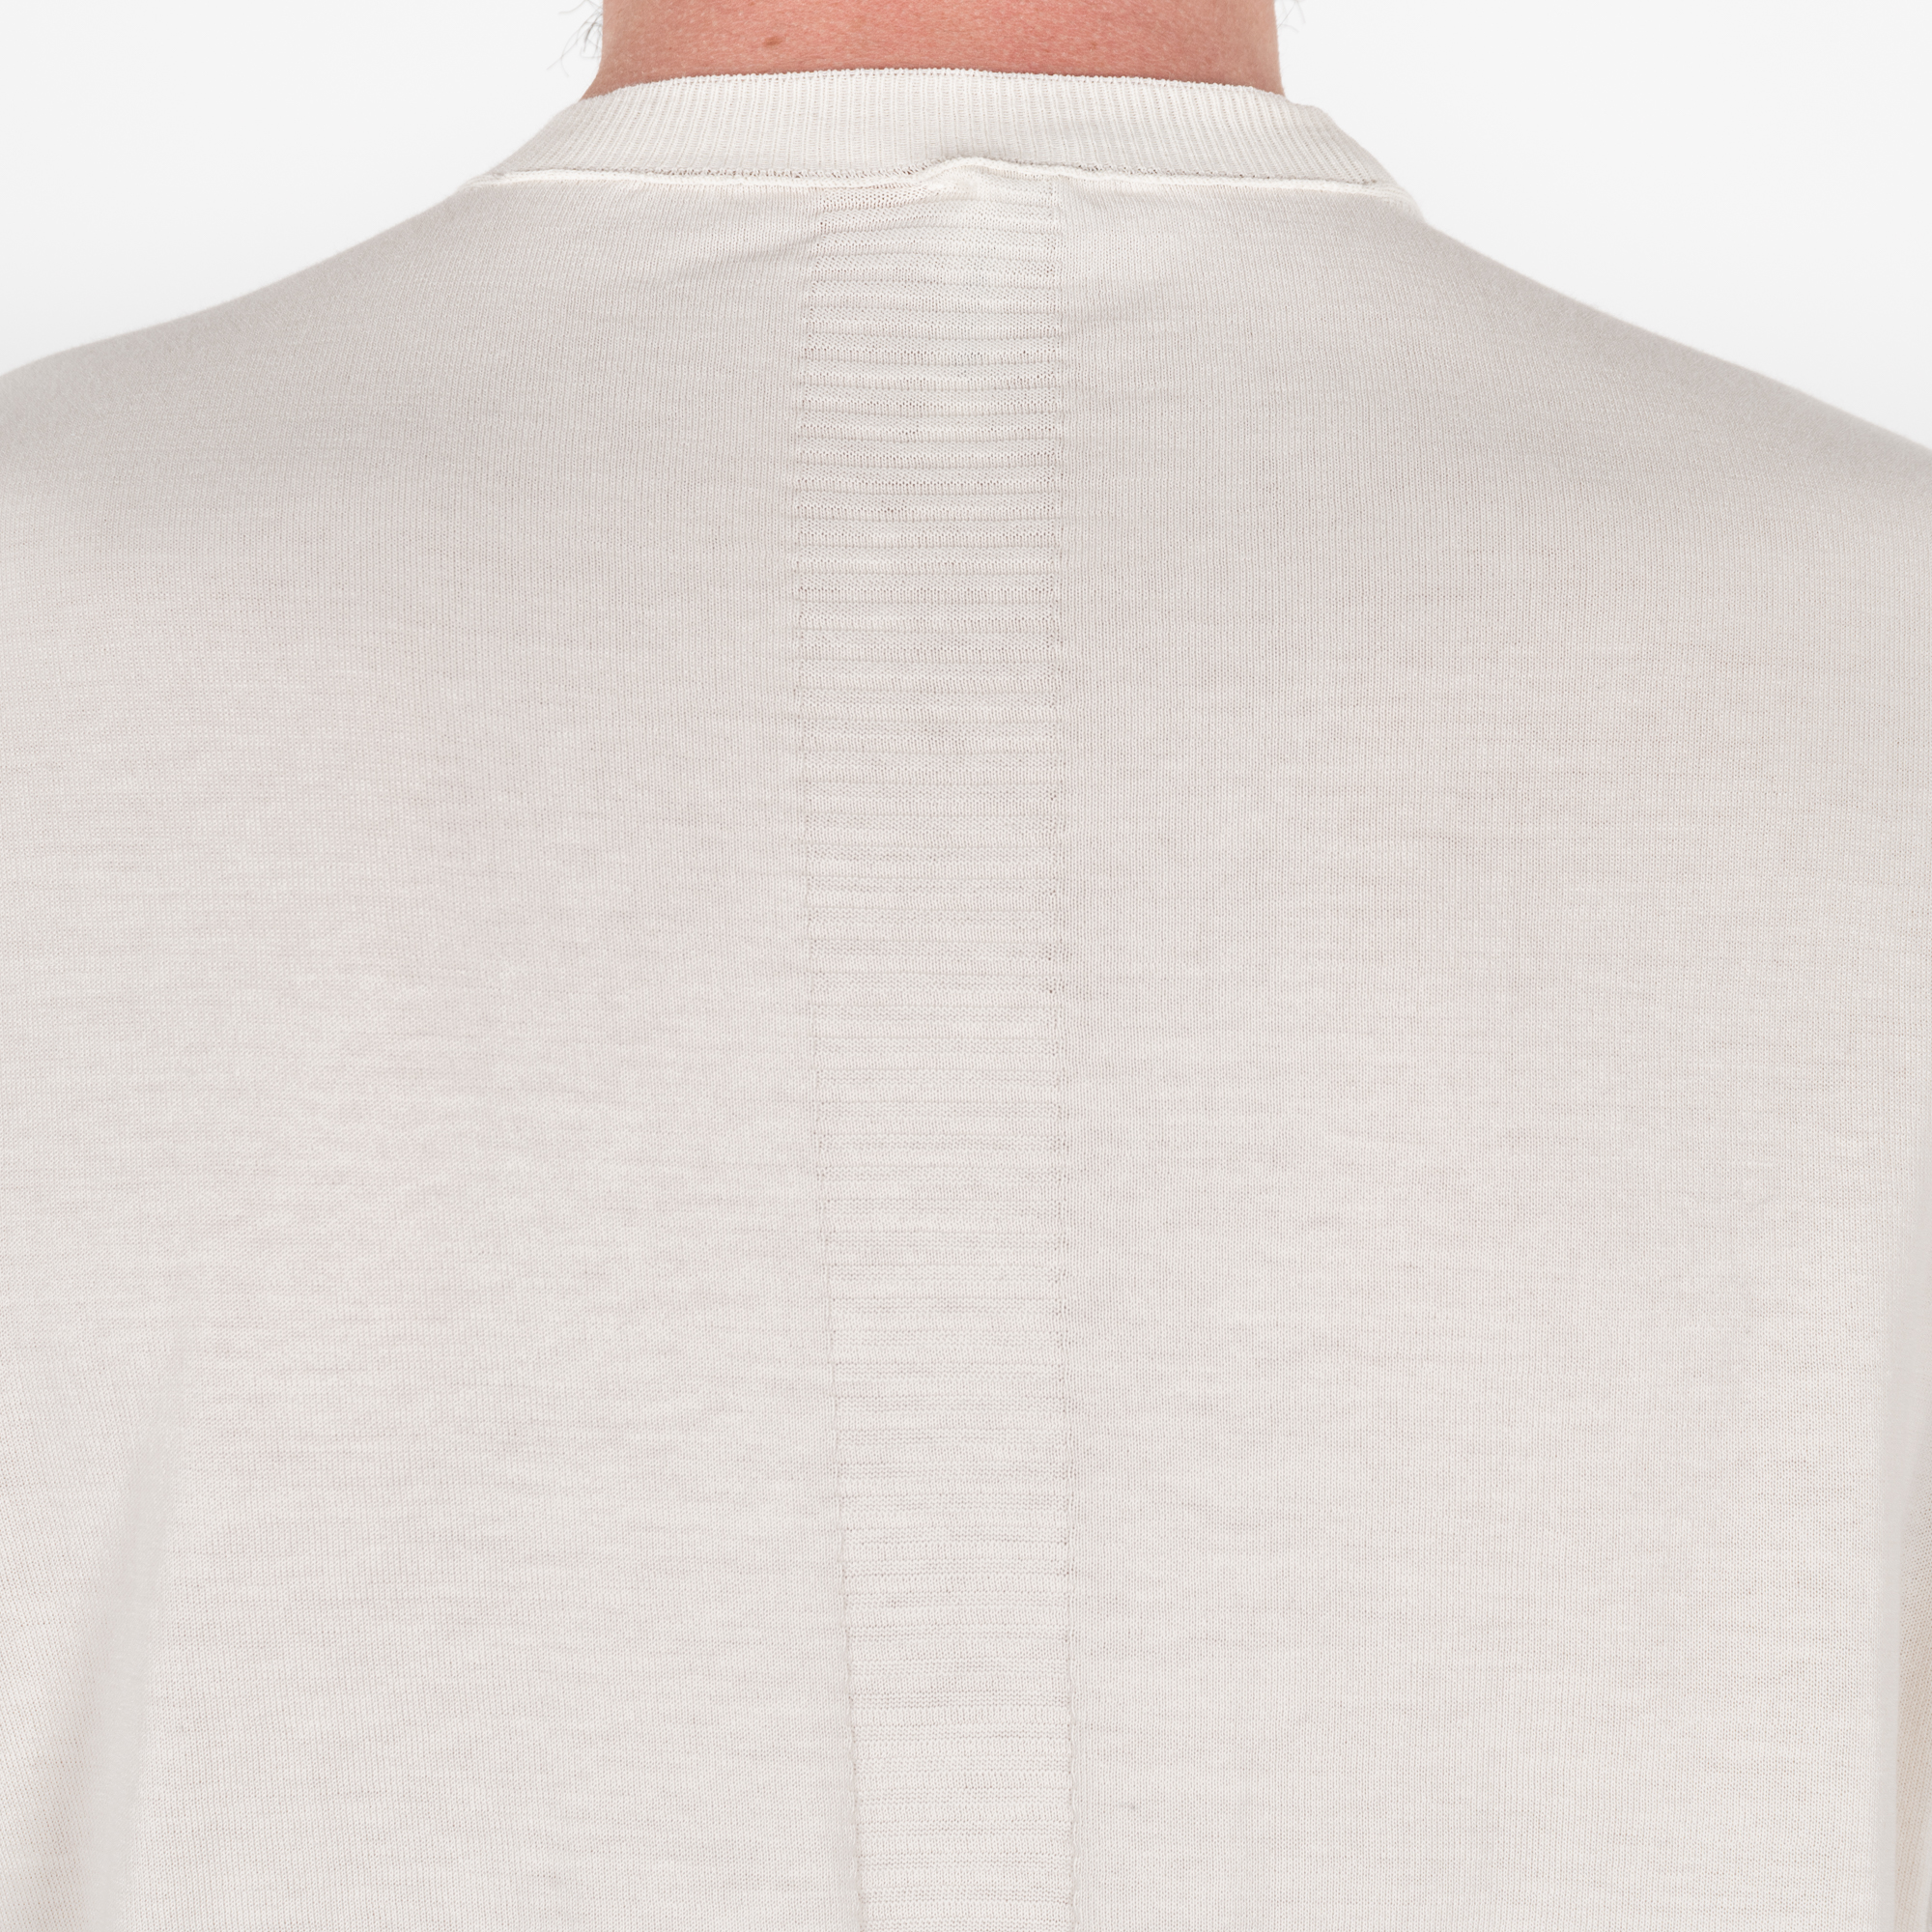 ICE-COLORED COTTON T-SHIRT|wolfensson